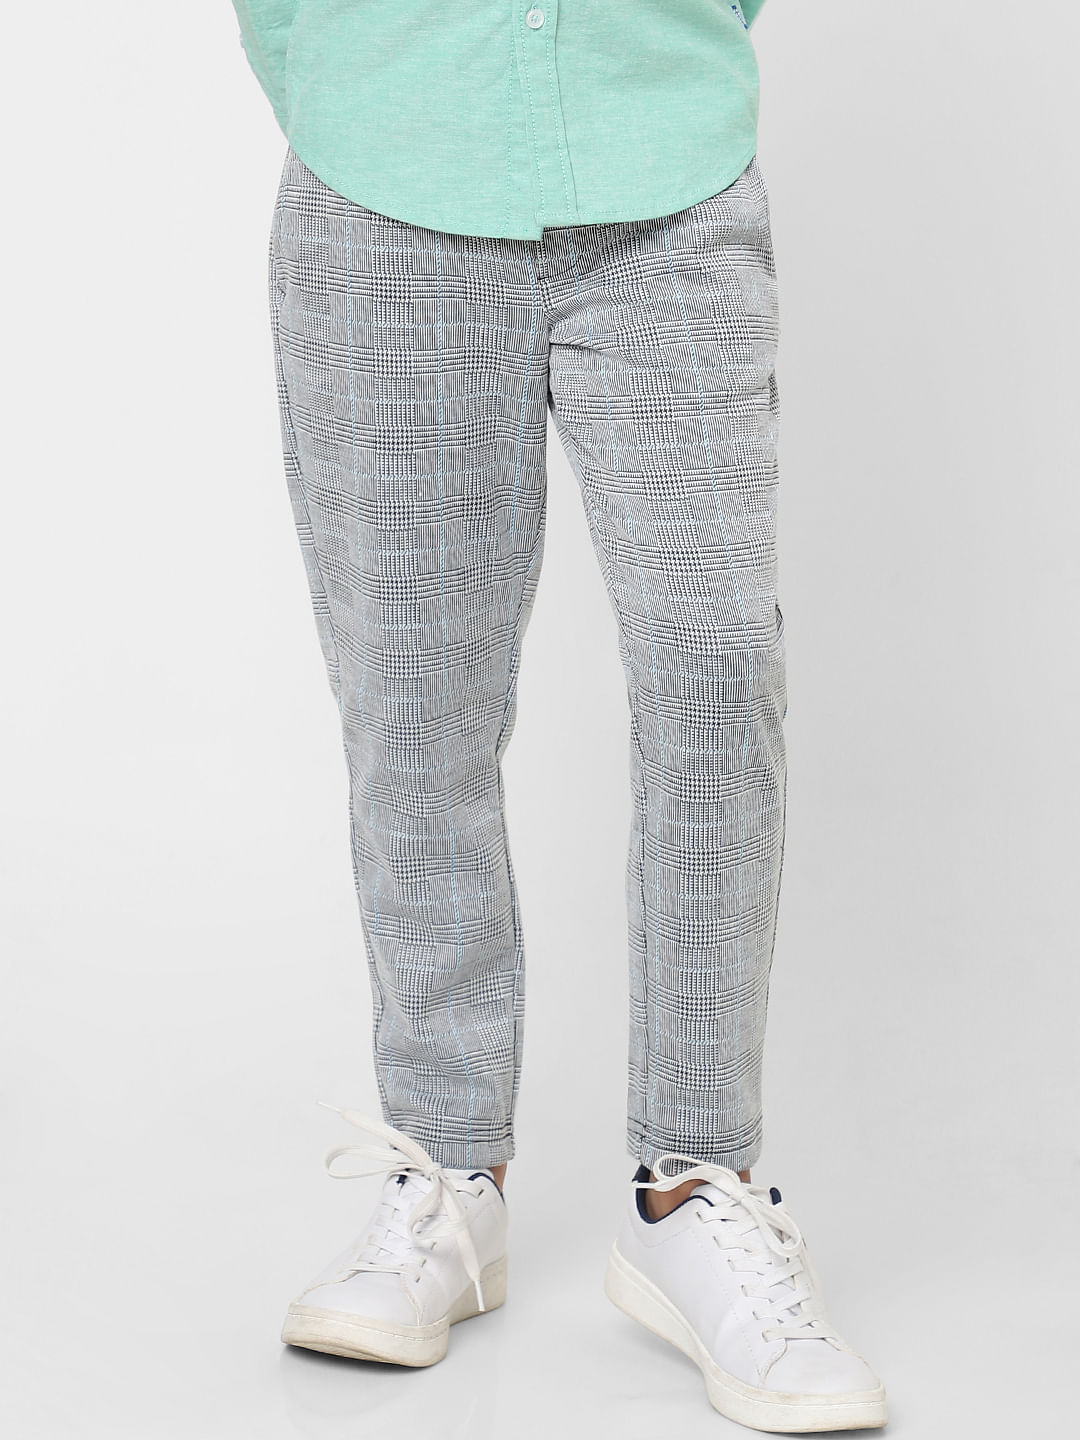 Shop Zipper Ankle Cargo Pants for Men from latest collection at Forever 21  | 329359